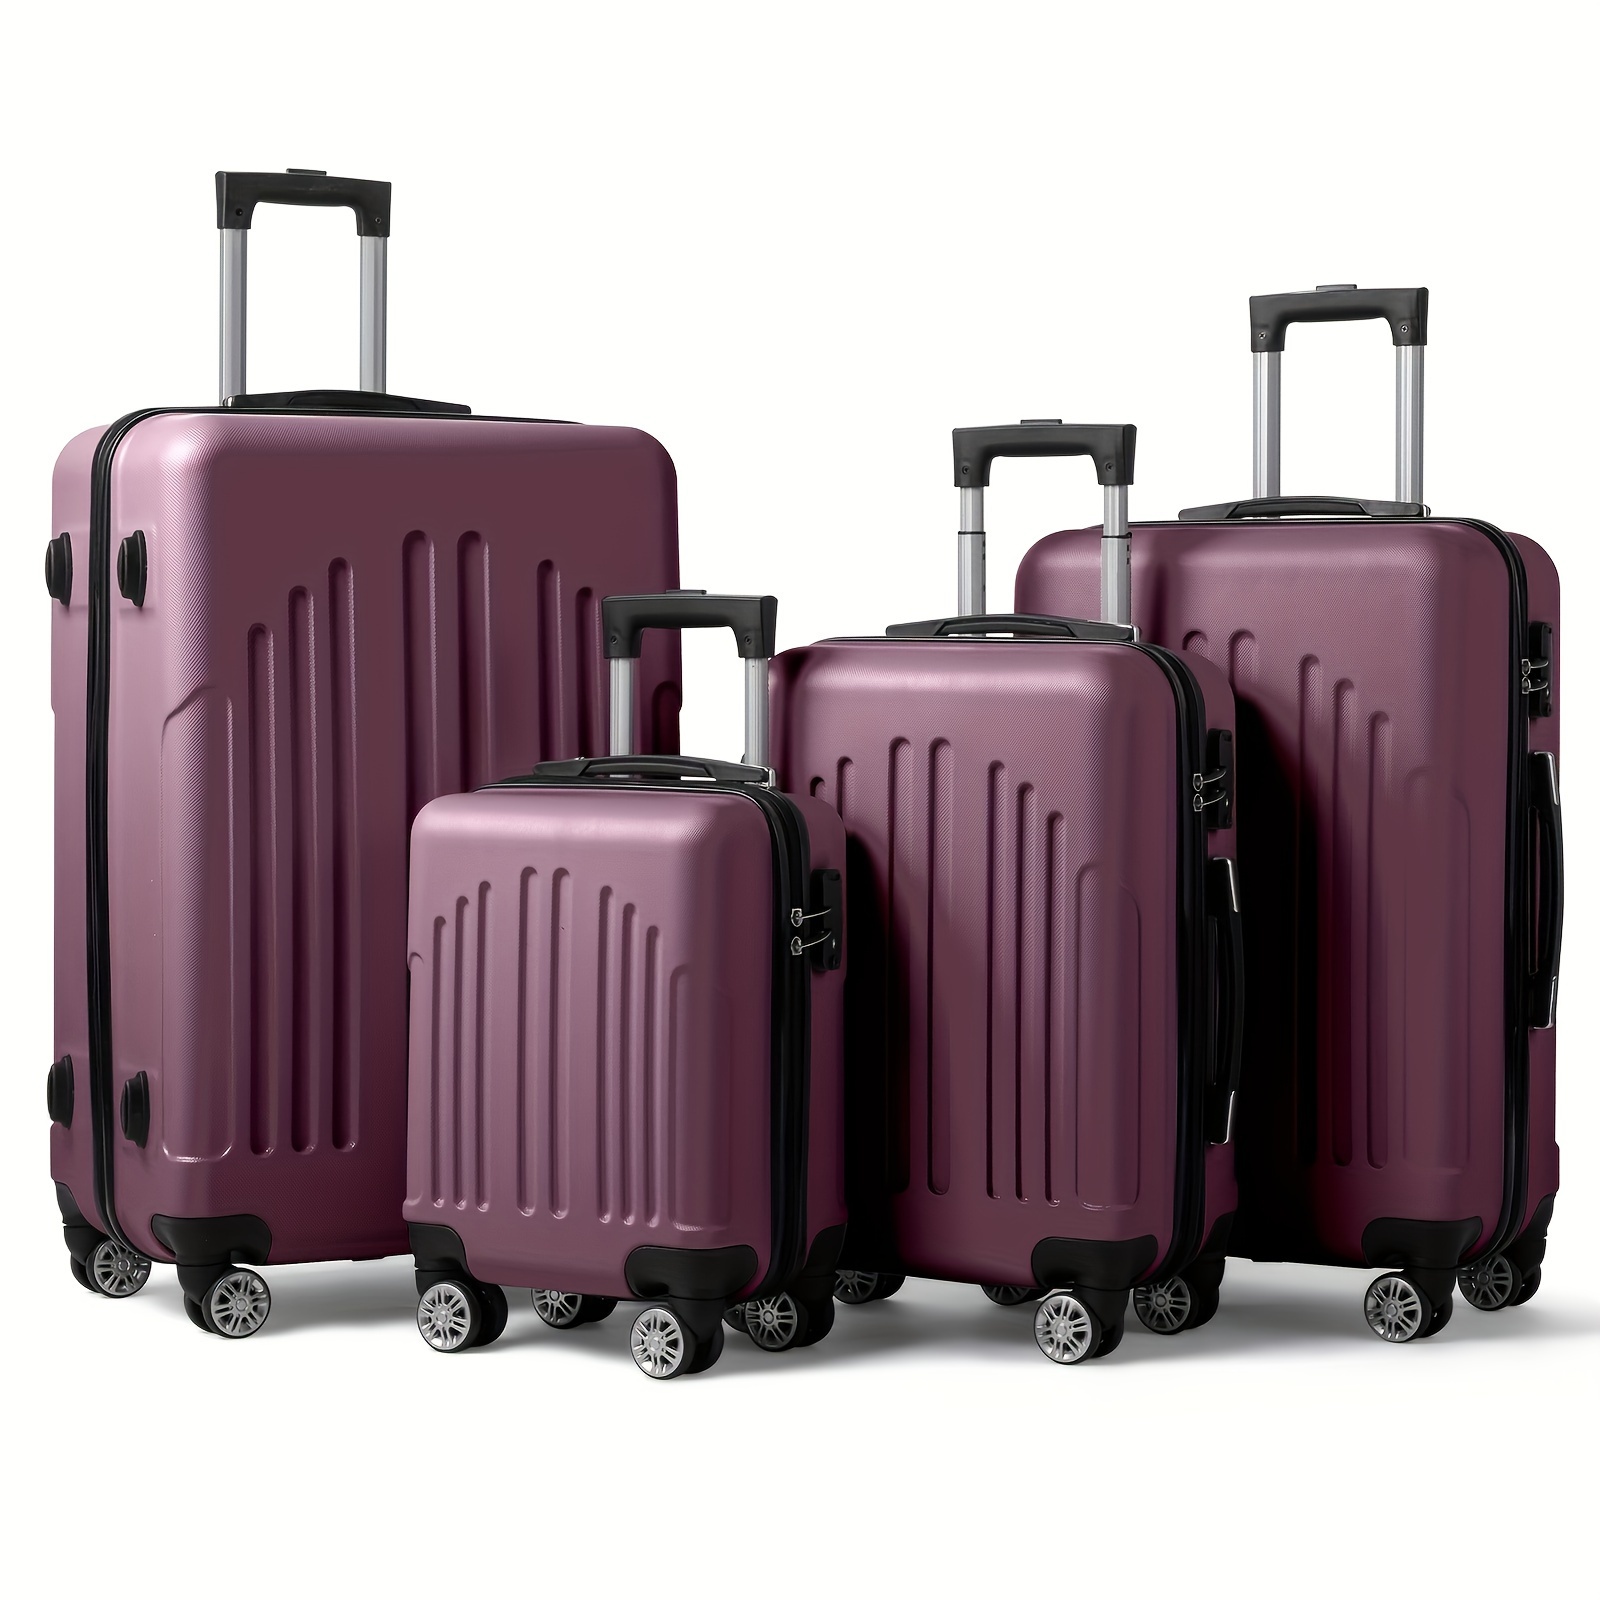 

4 Piece Luggage Set Abs Hard Shell Suitcase Luggage Sets Double Wheels With Tsa Lock Purple Orchid